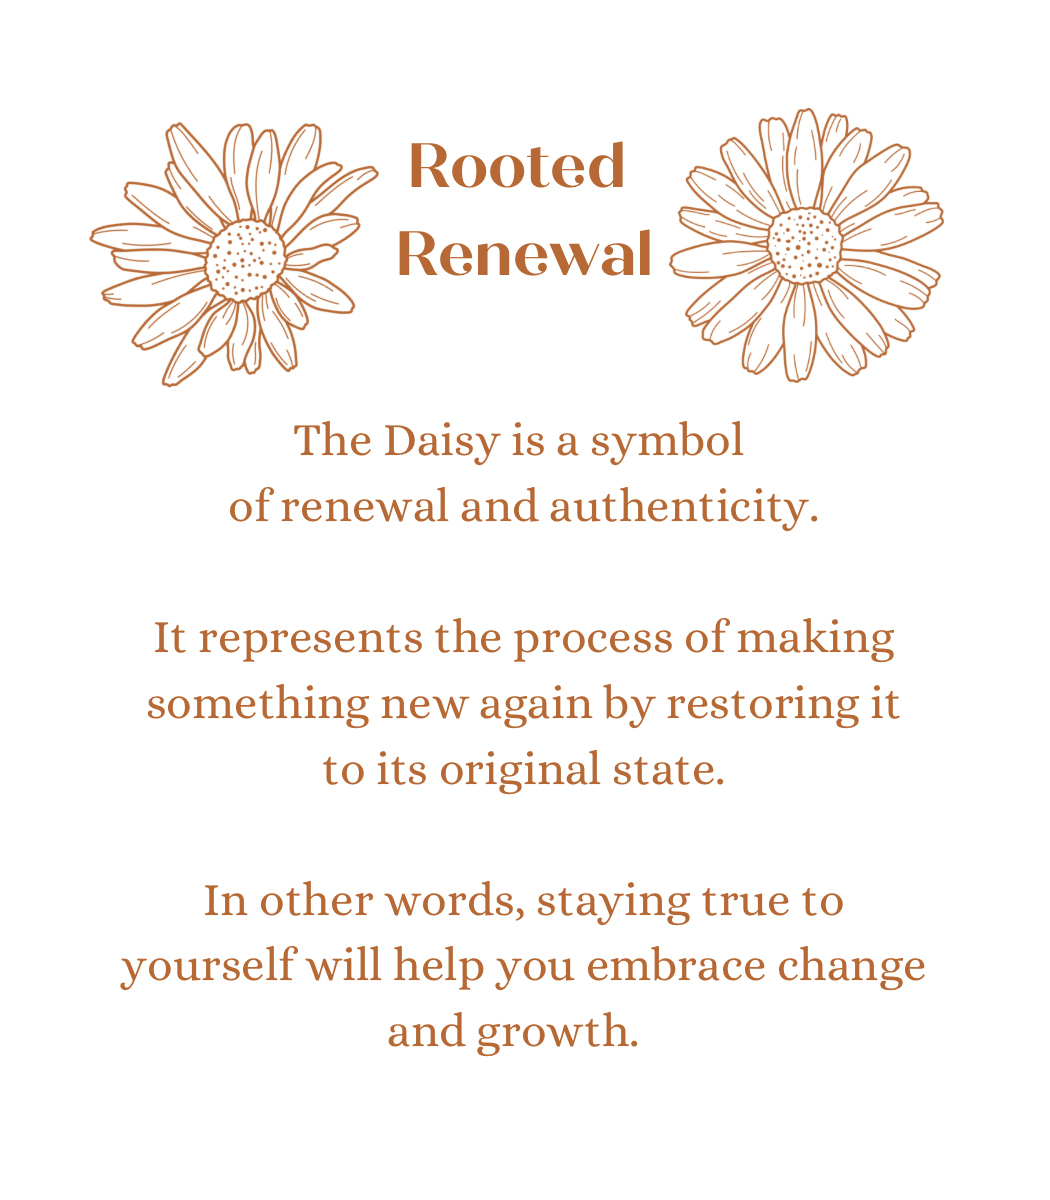 Rooted Renewal in Gaia